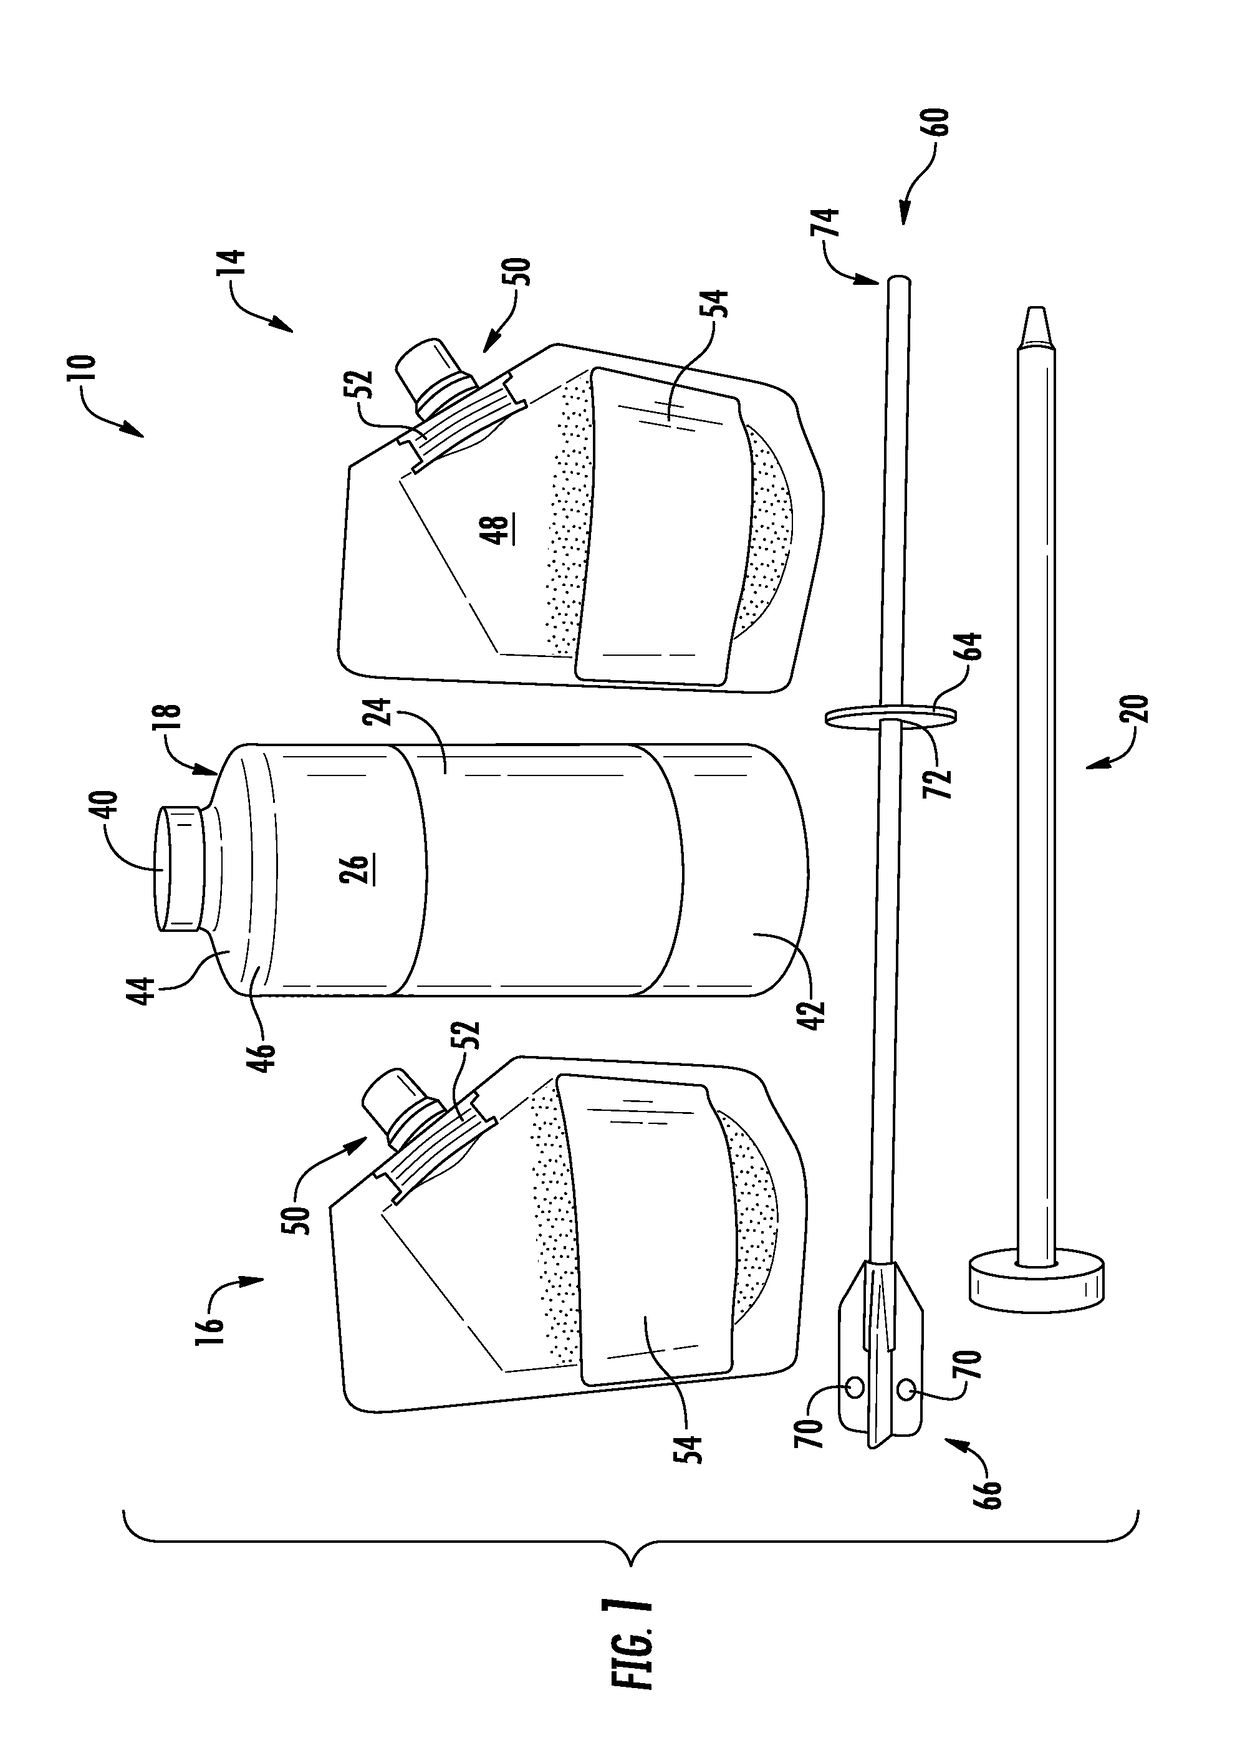 Concrete joint filling kit, method and device